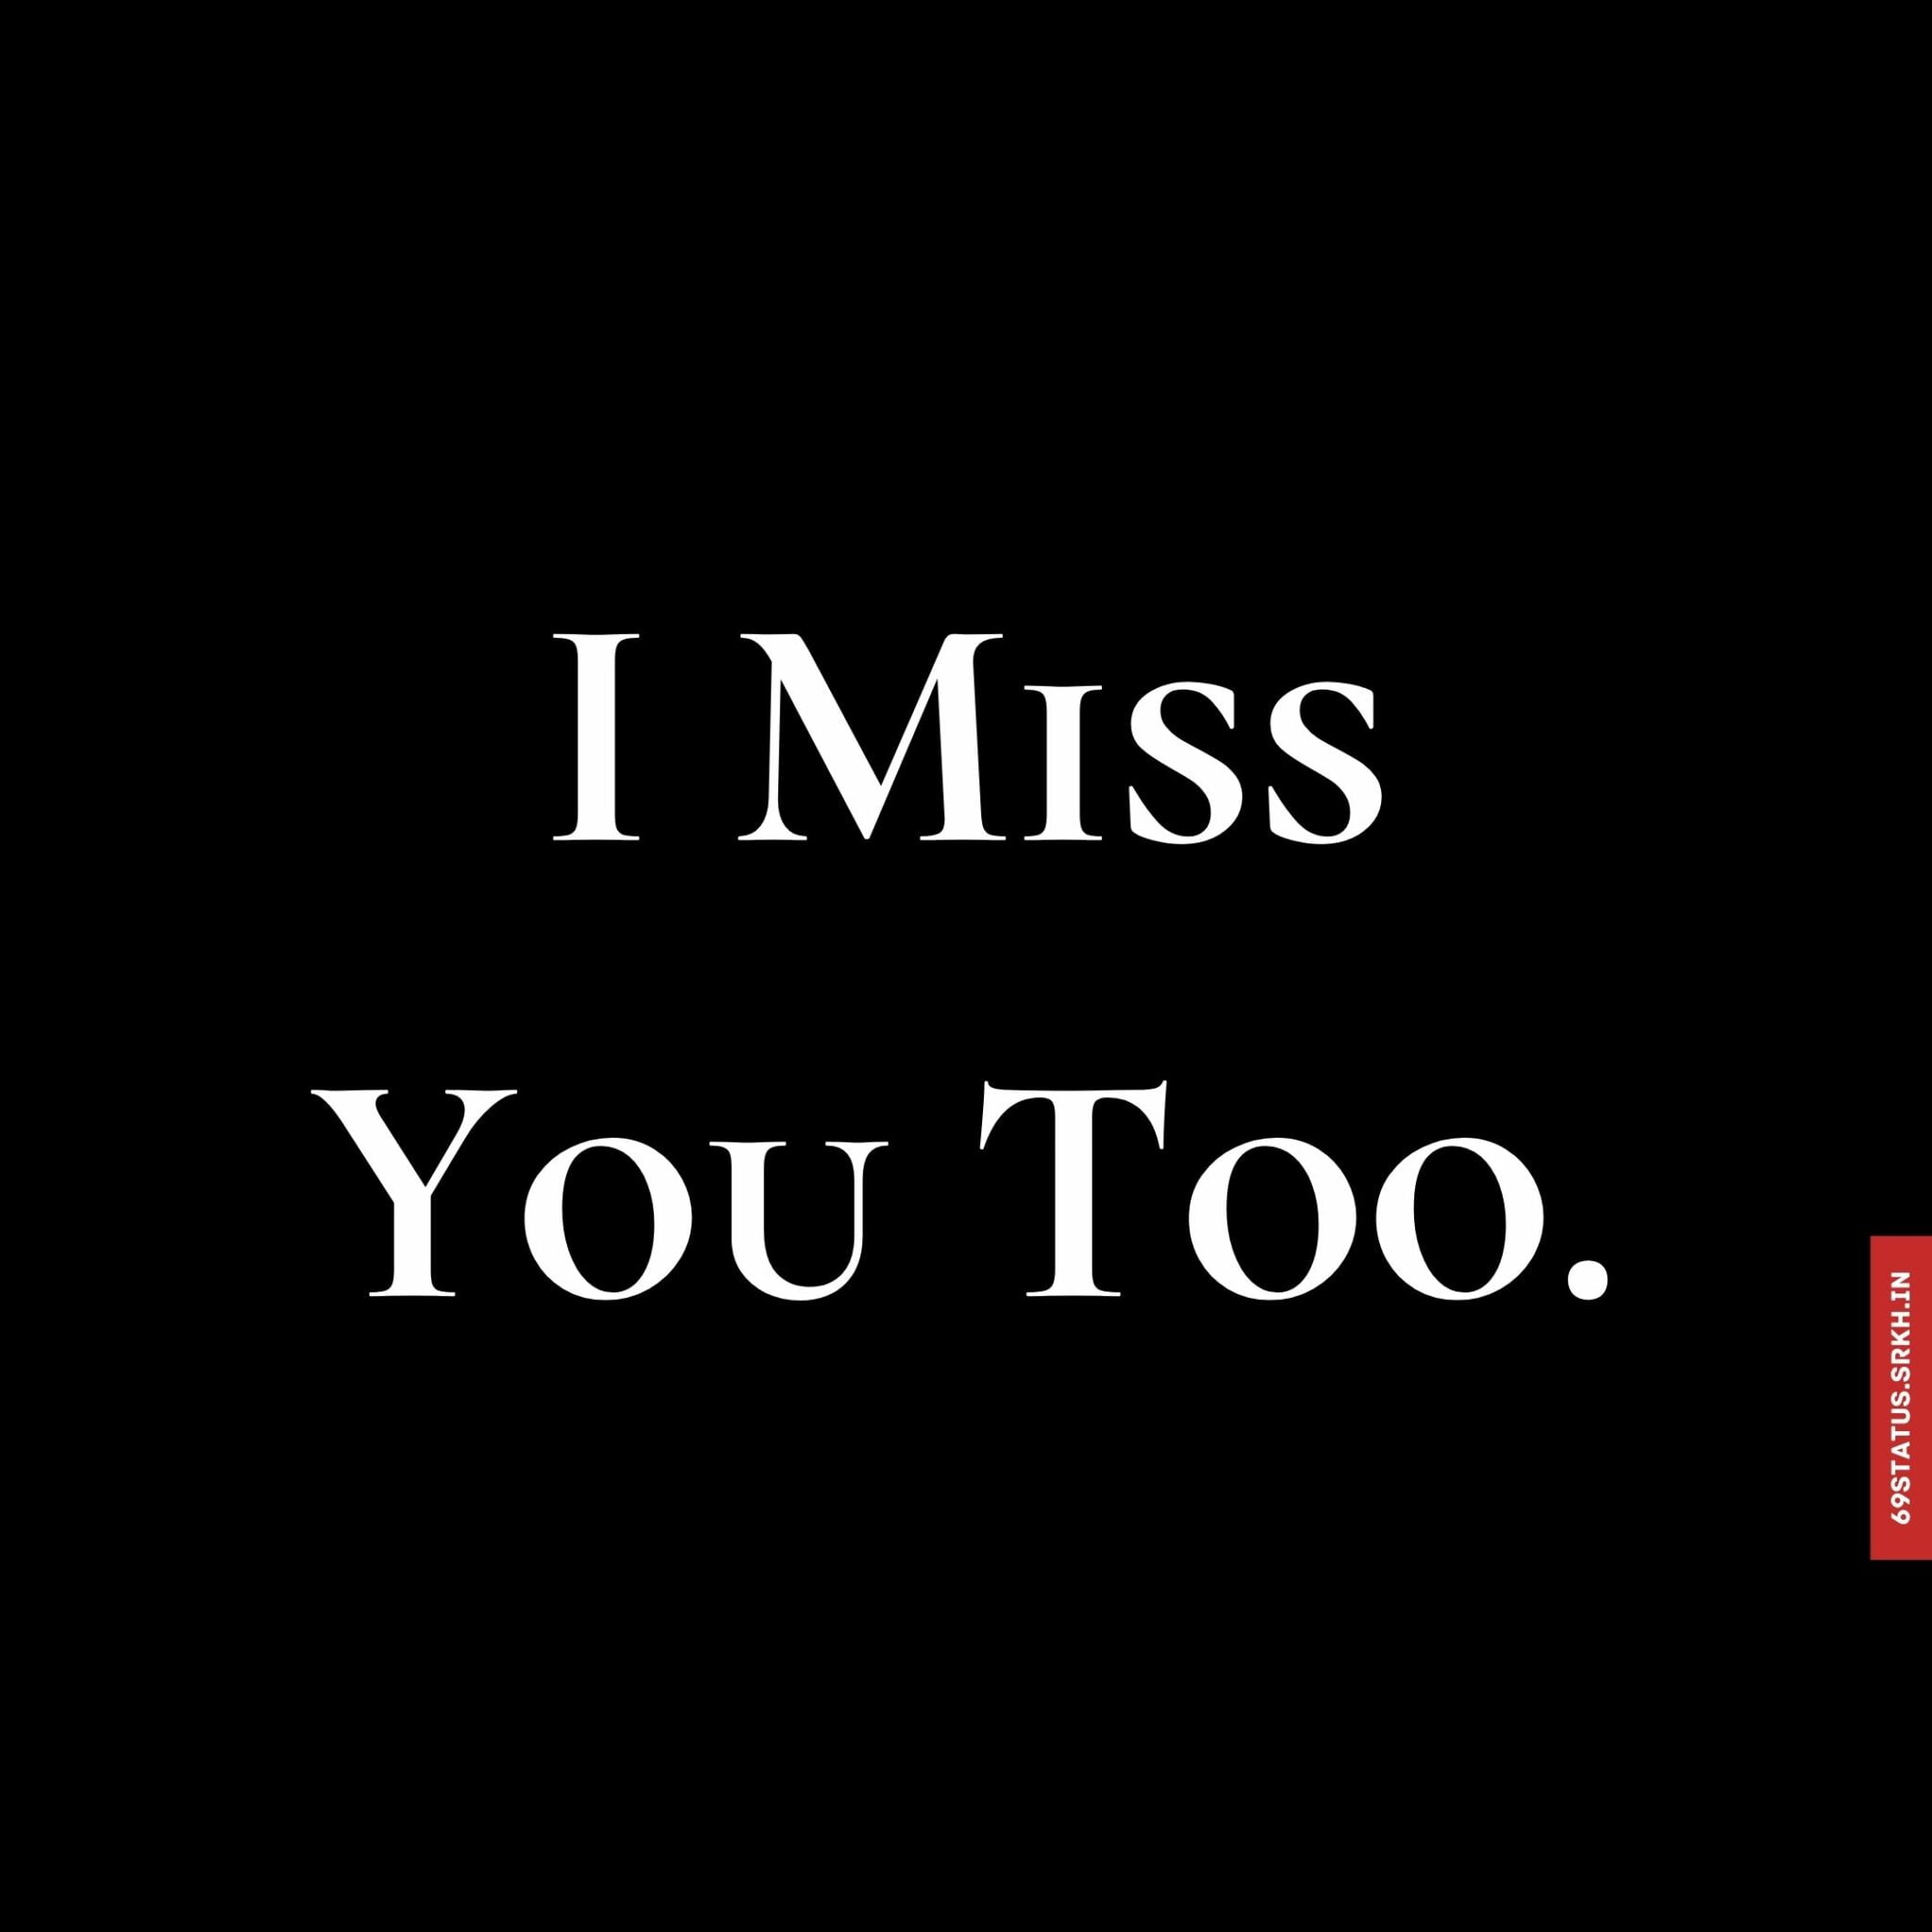 I miss you too images